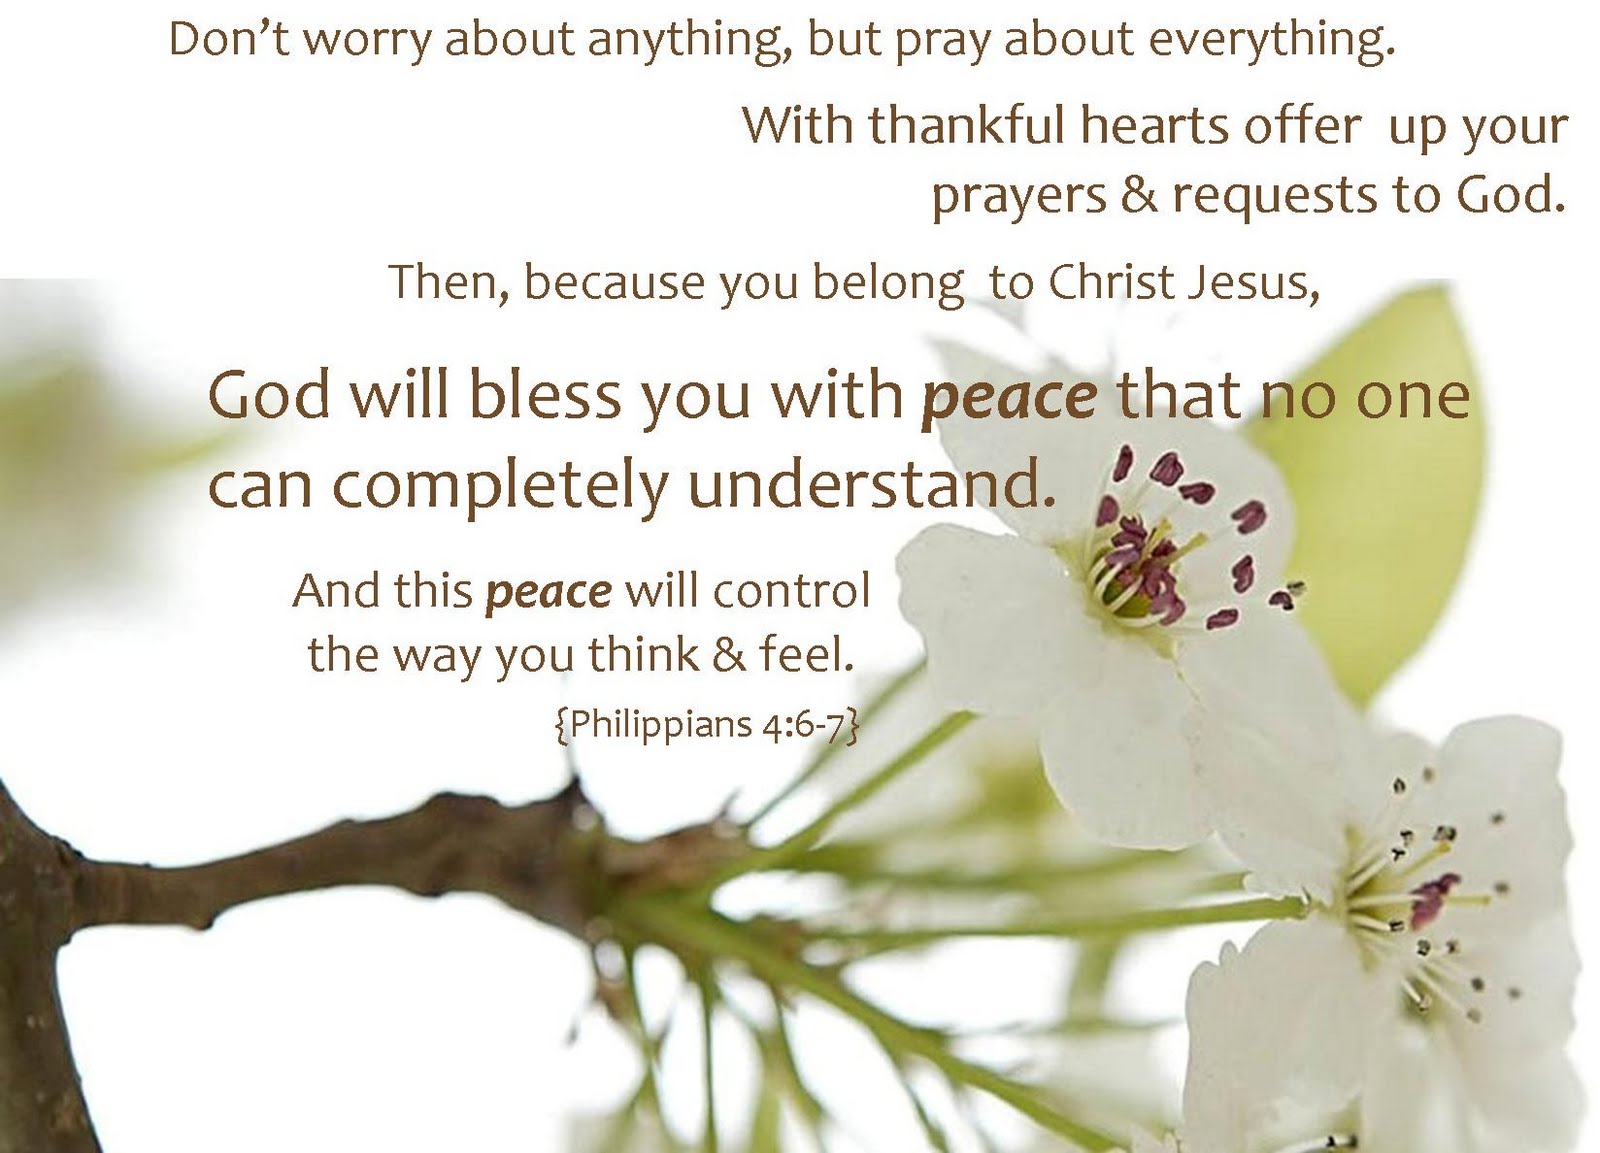 God will bless you with peace